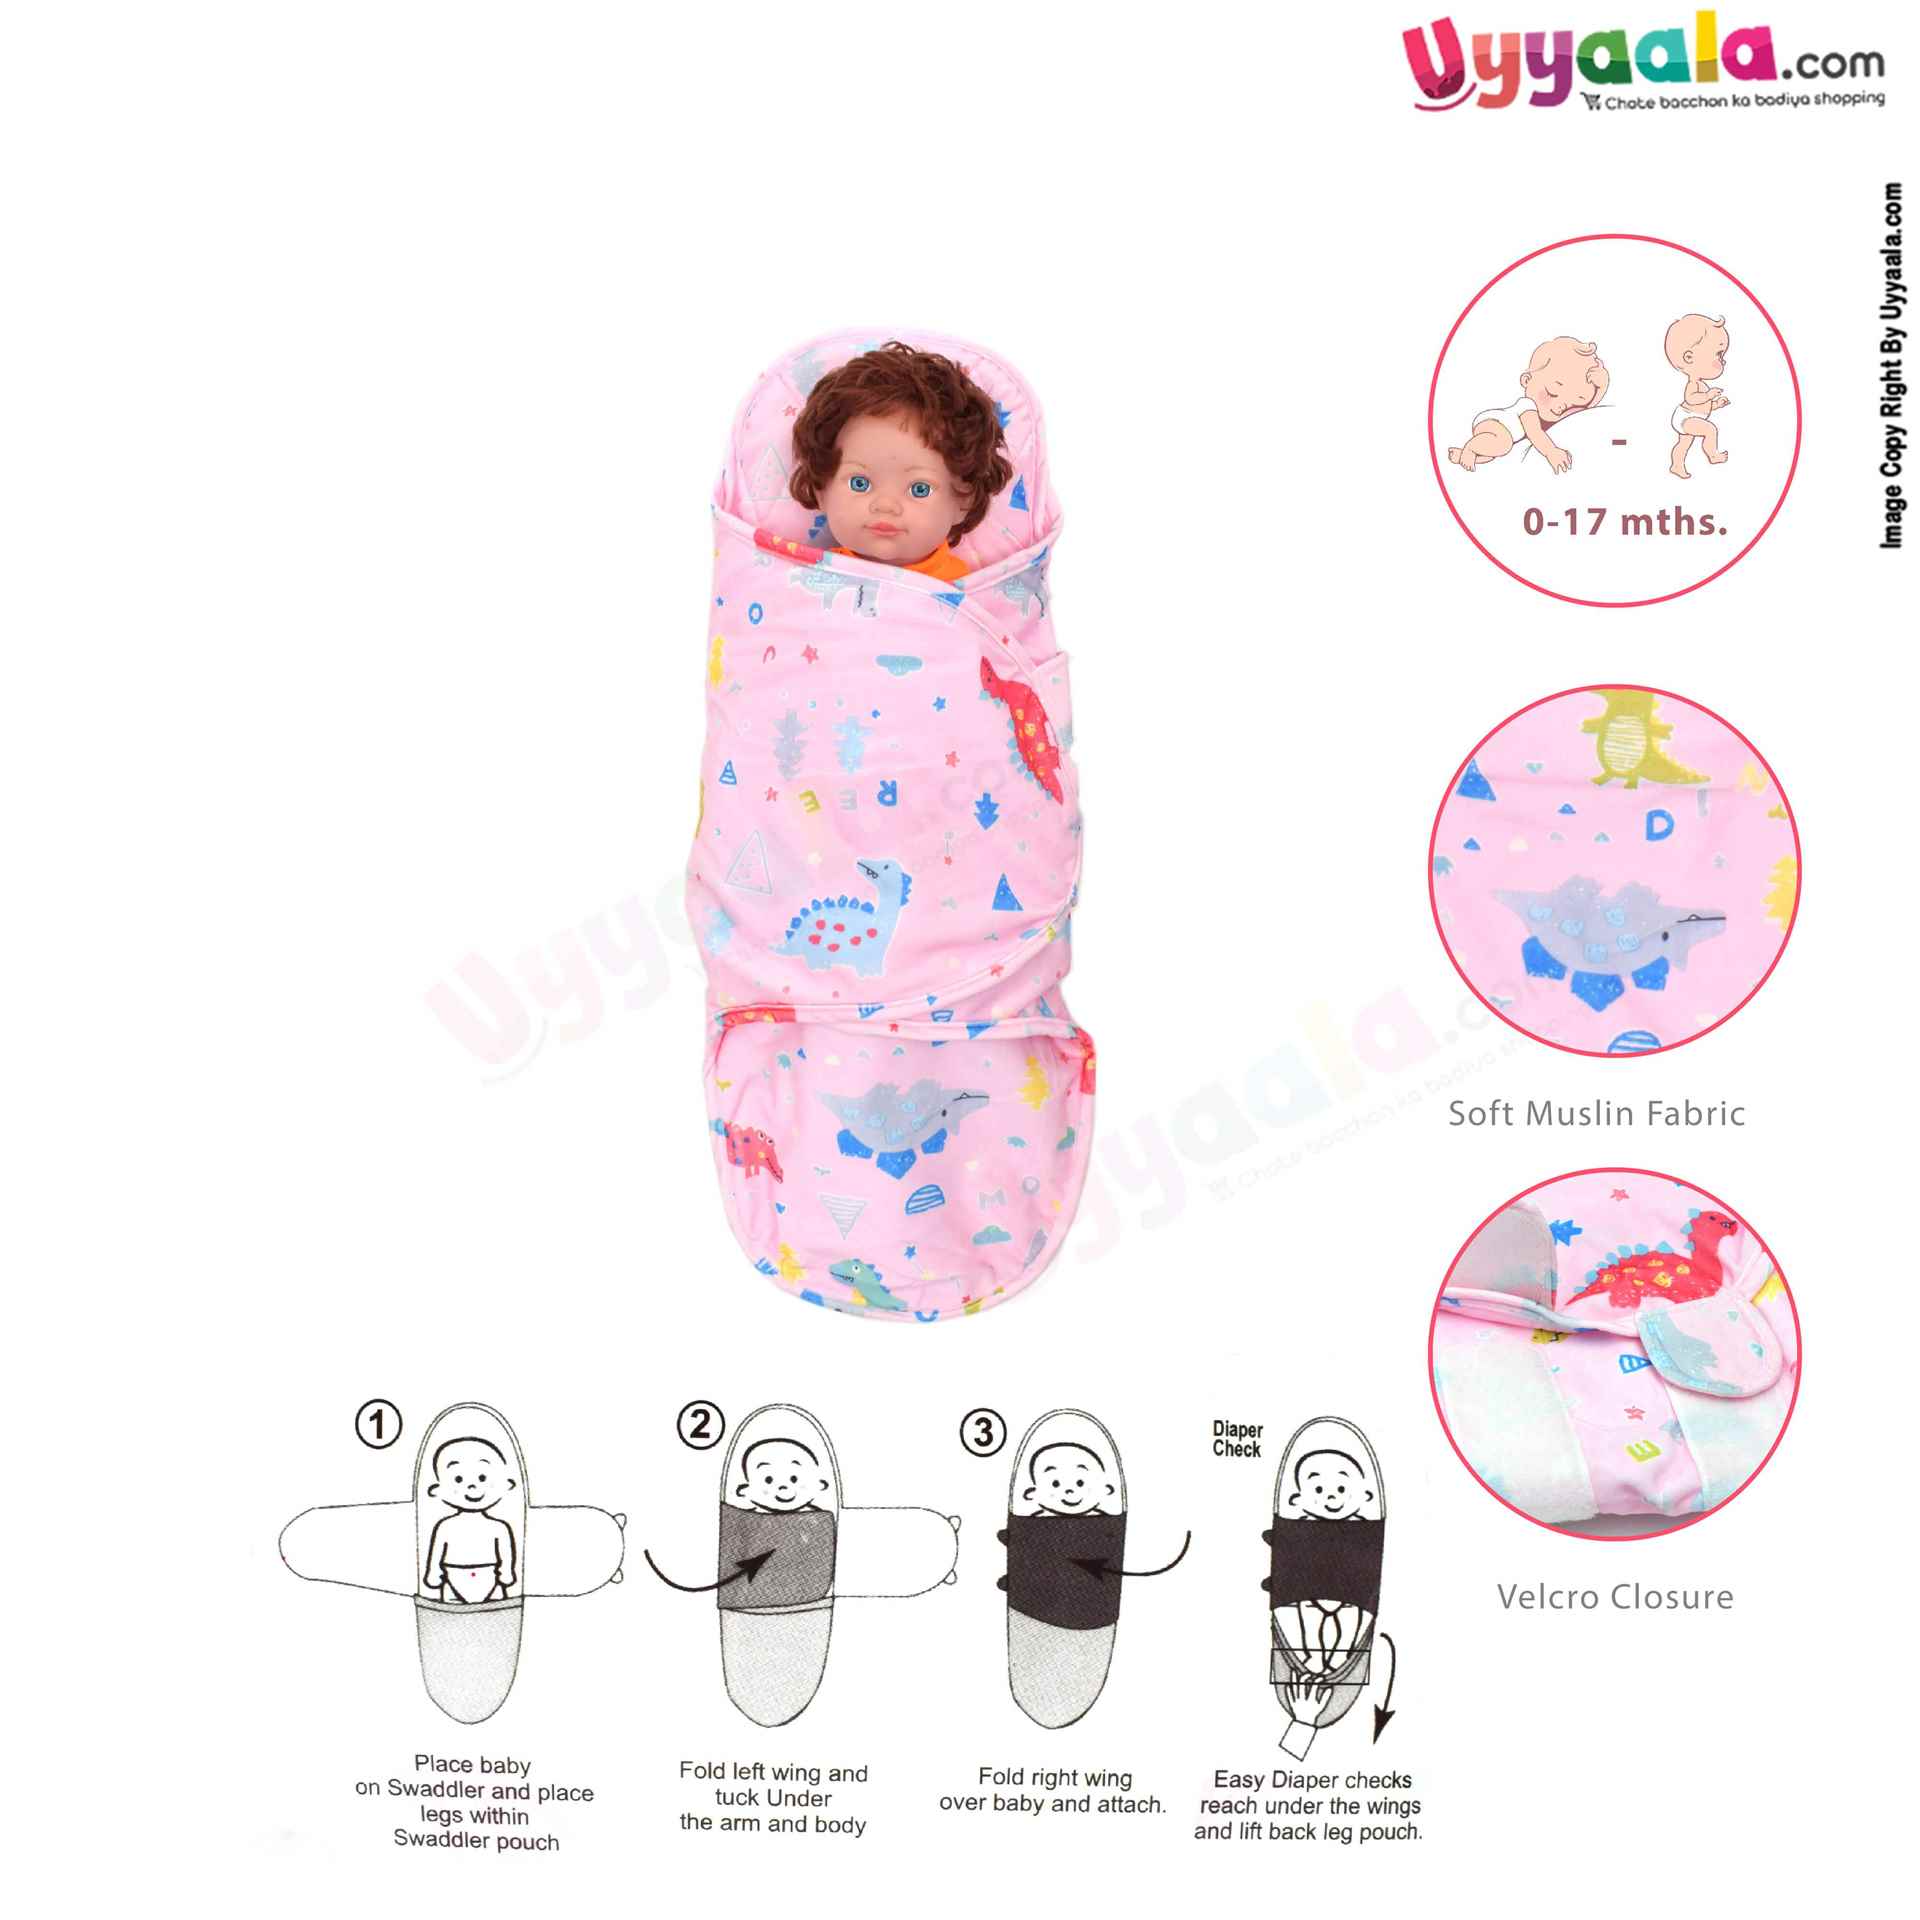 Muslin Cotton Baby Swaddle Wrapper with Neck Support and Animal Prints, 0-17m, Size(88*69cm) - Light Pinks